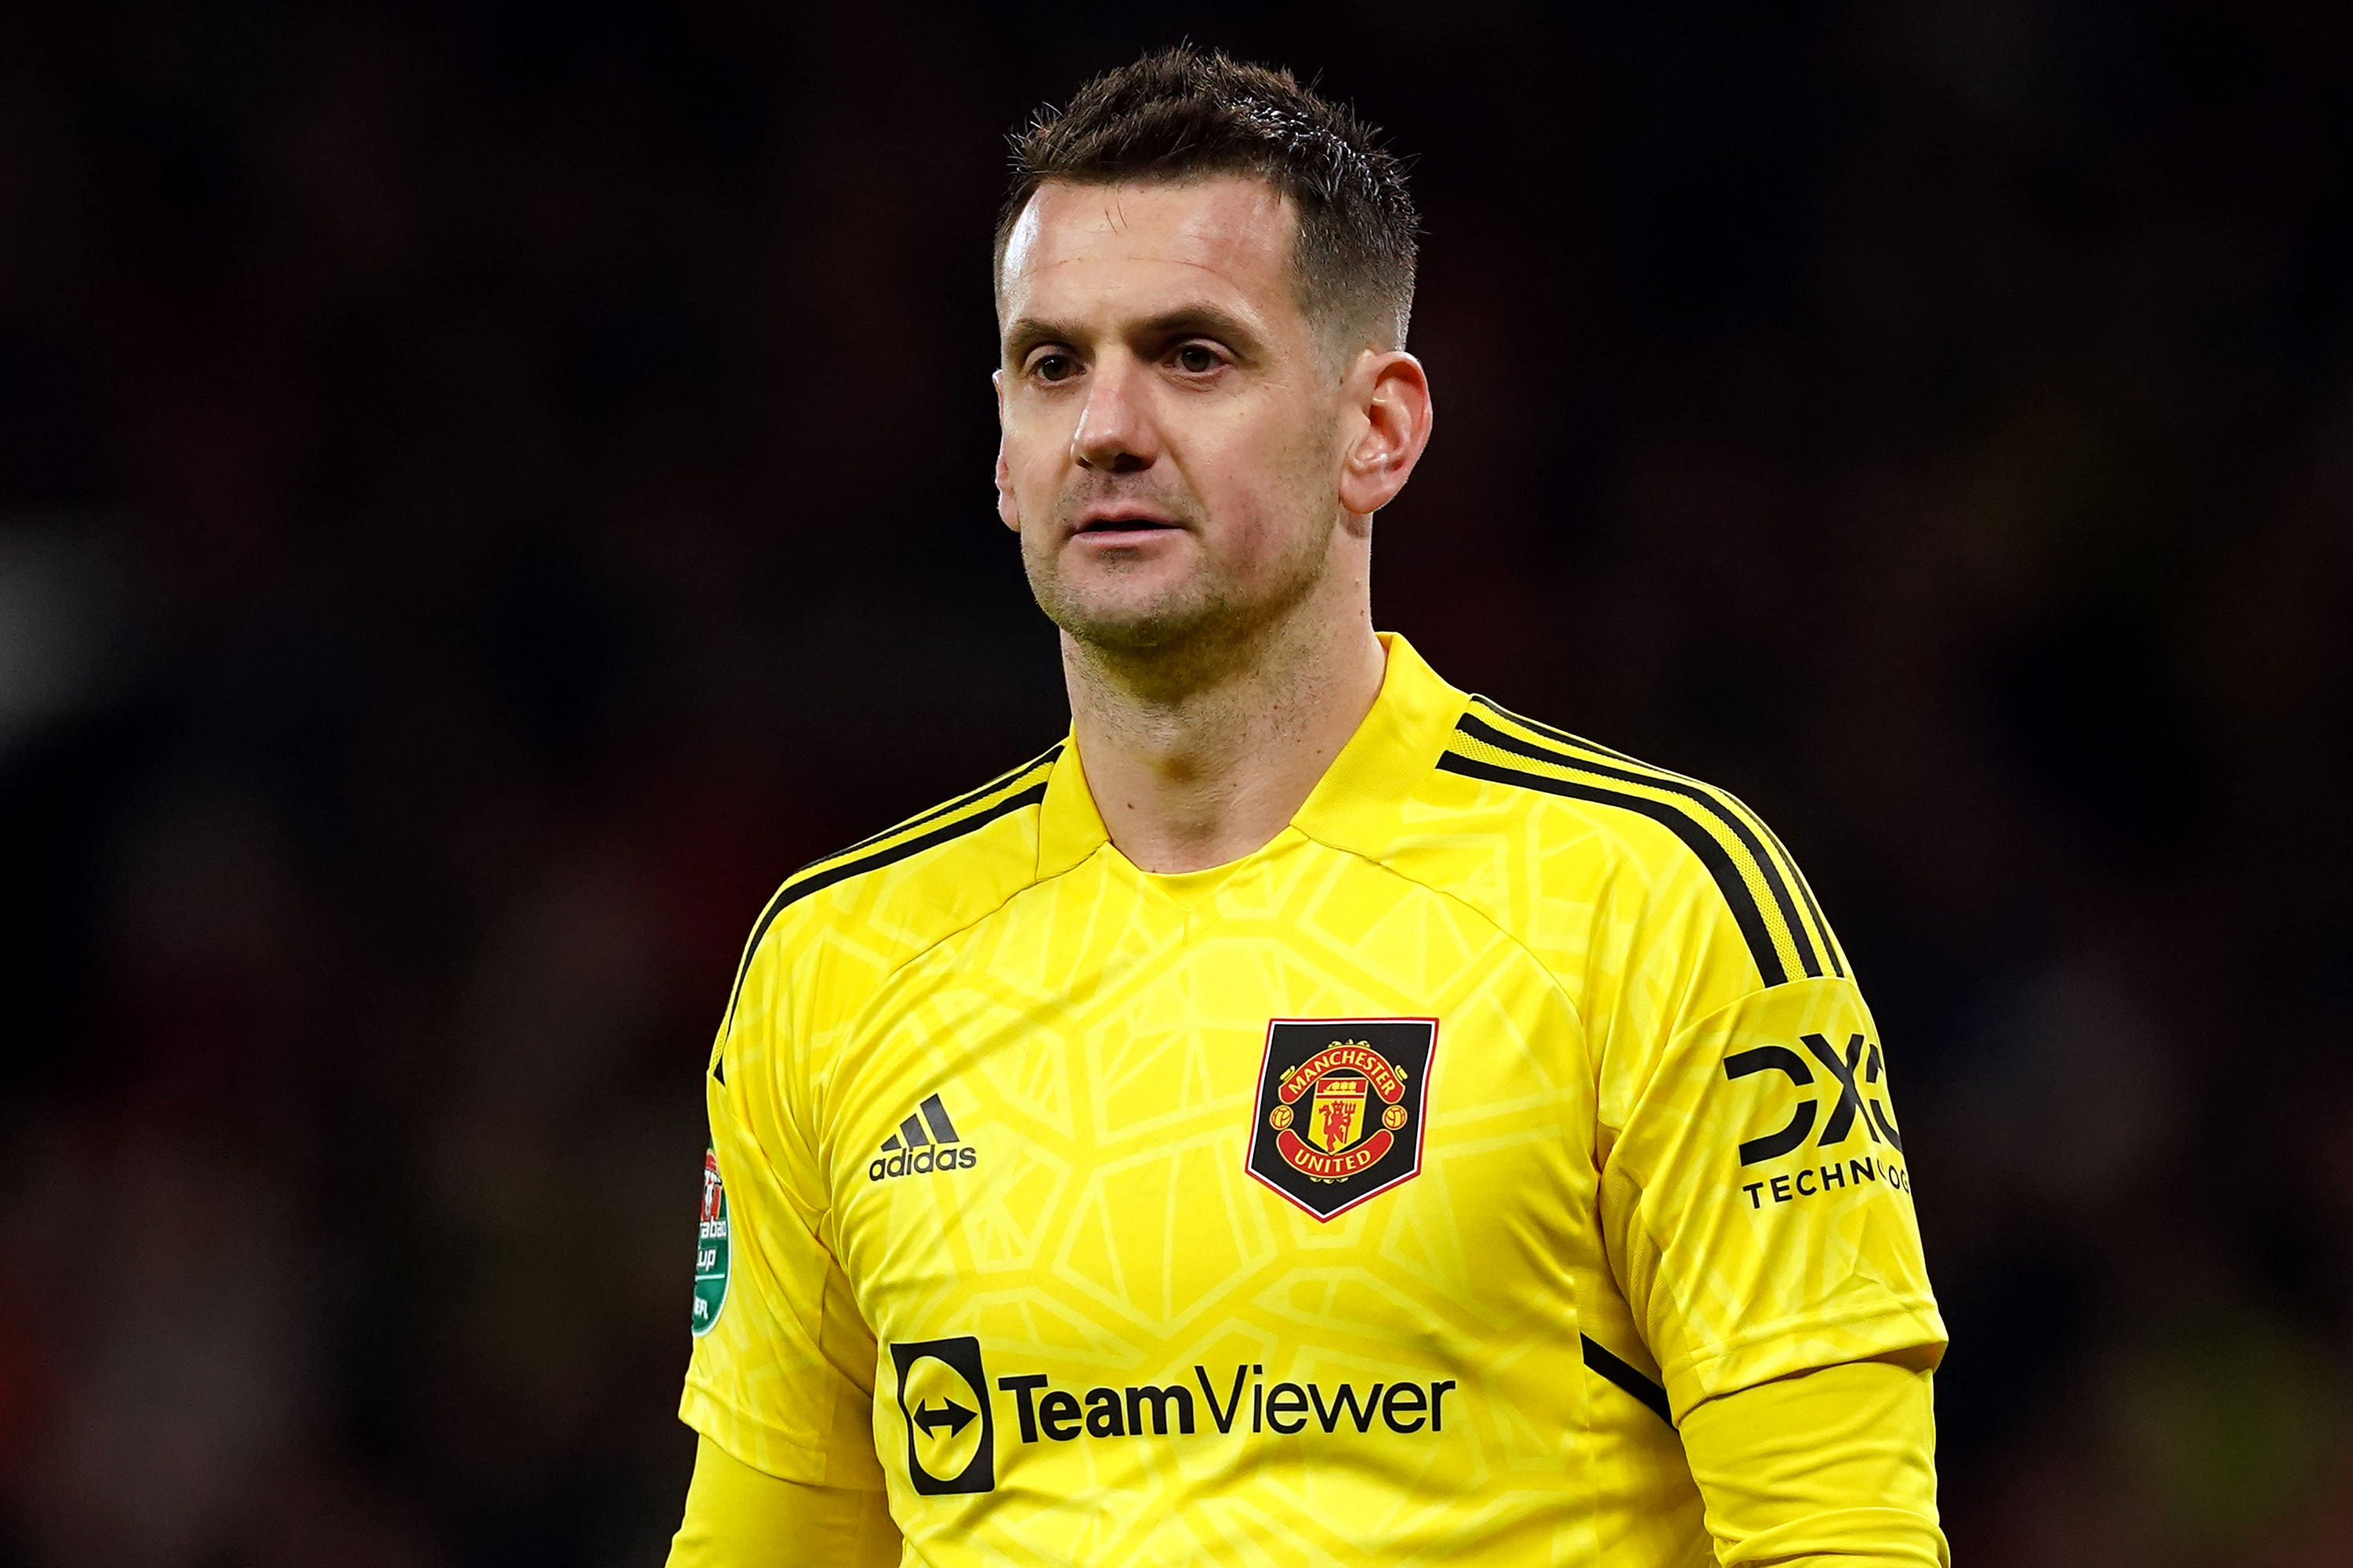 Tom Heaton has signed a new deal with Manchester United (Martin Rickett/PA)